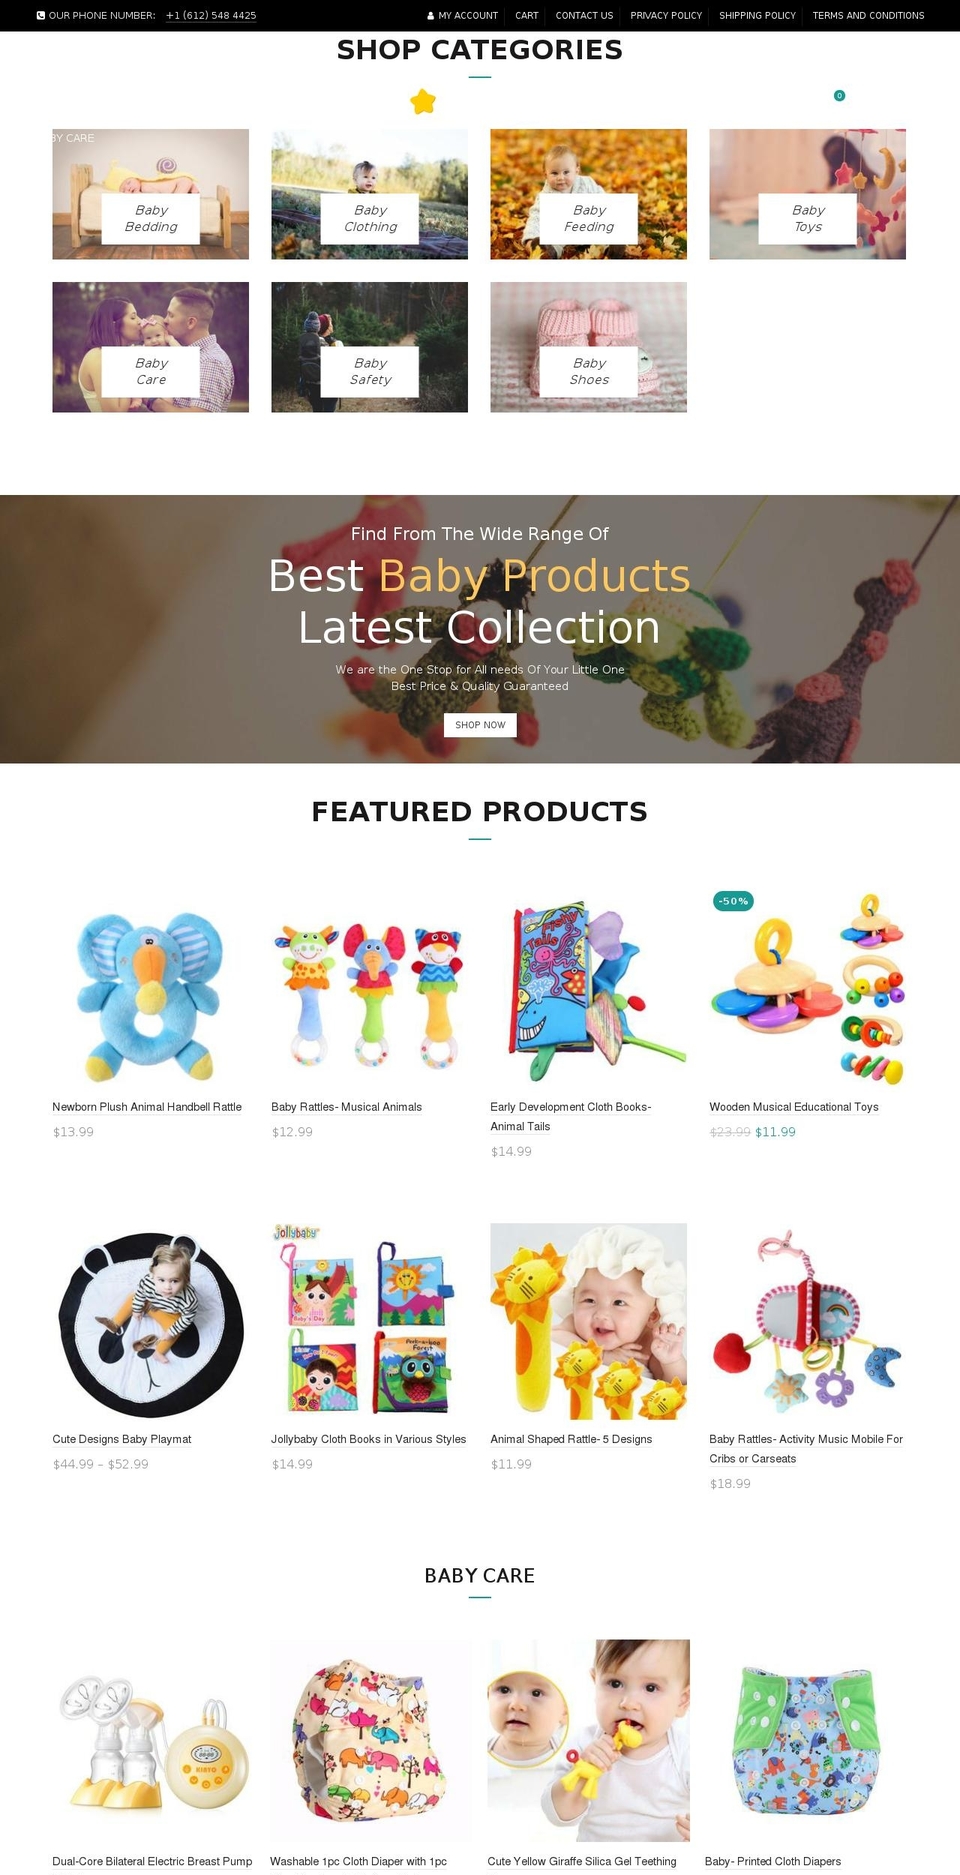 Brooklyn Shopify theme site example timotte.com